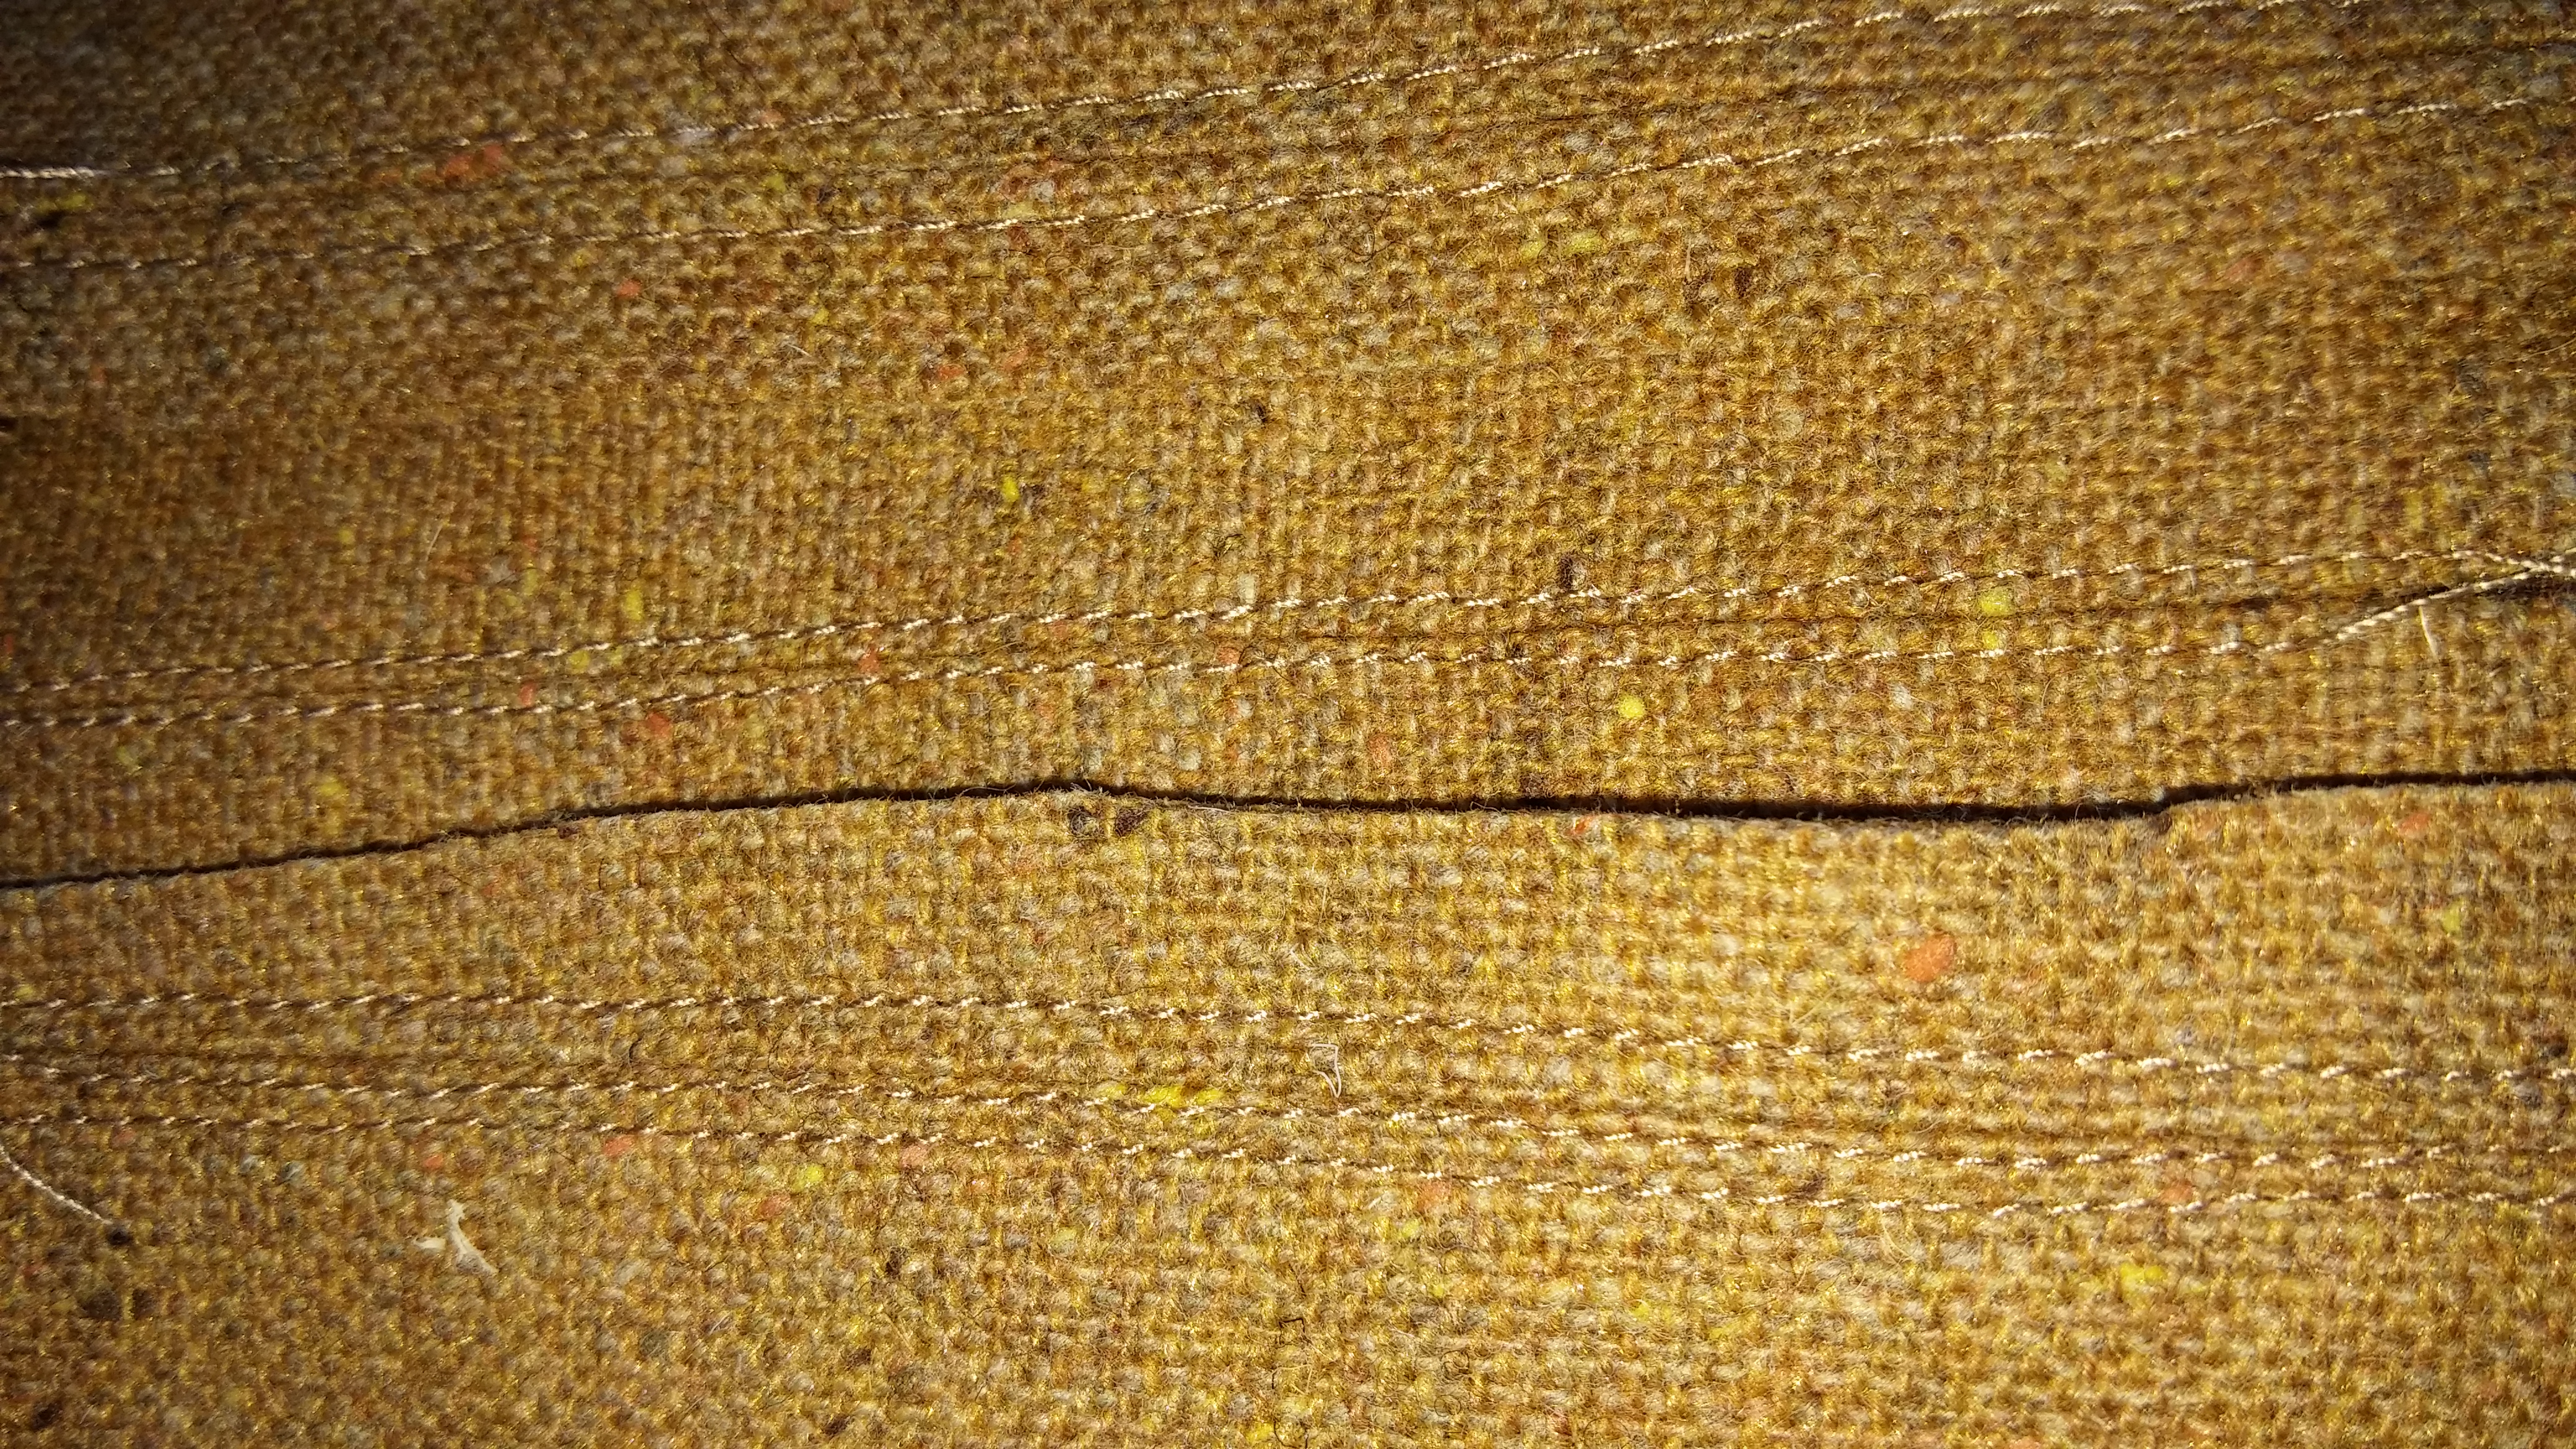 Playing around with different stitch lengths  on seams.